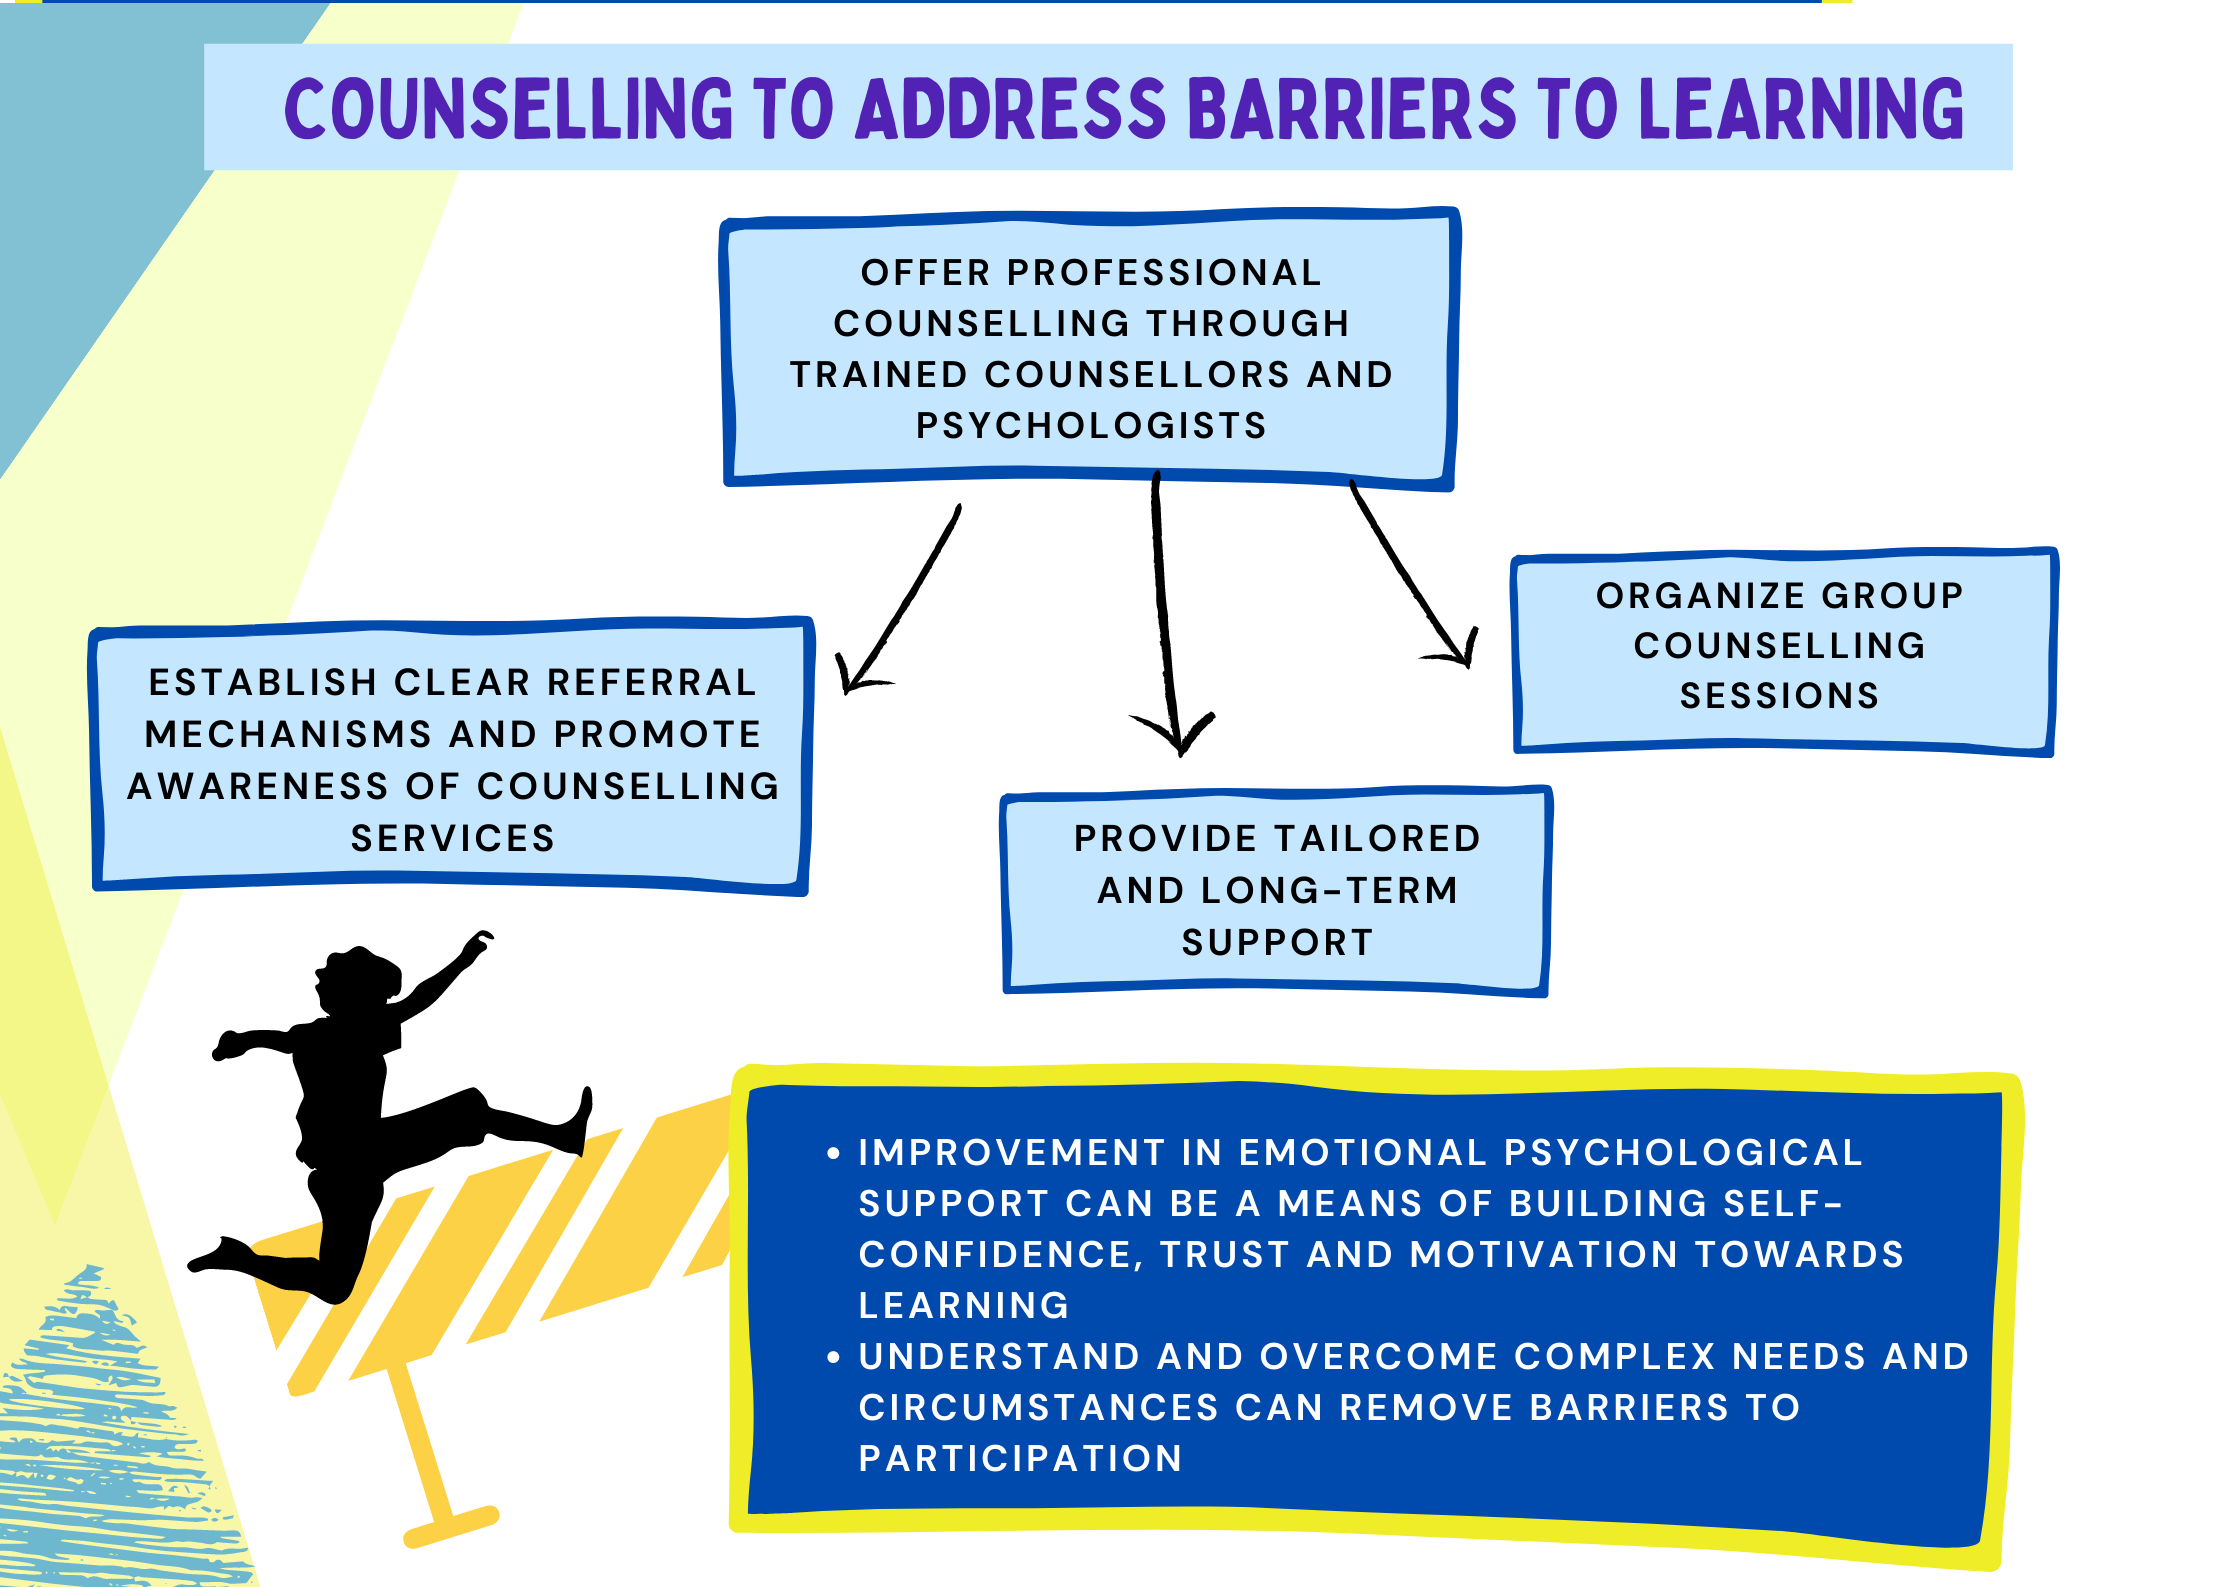 06_counselling to address barriers to learning